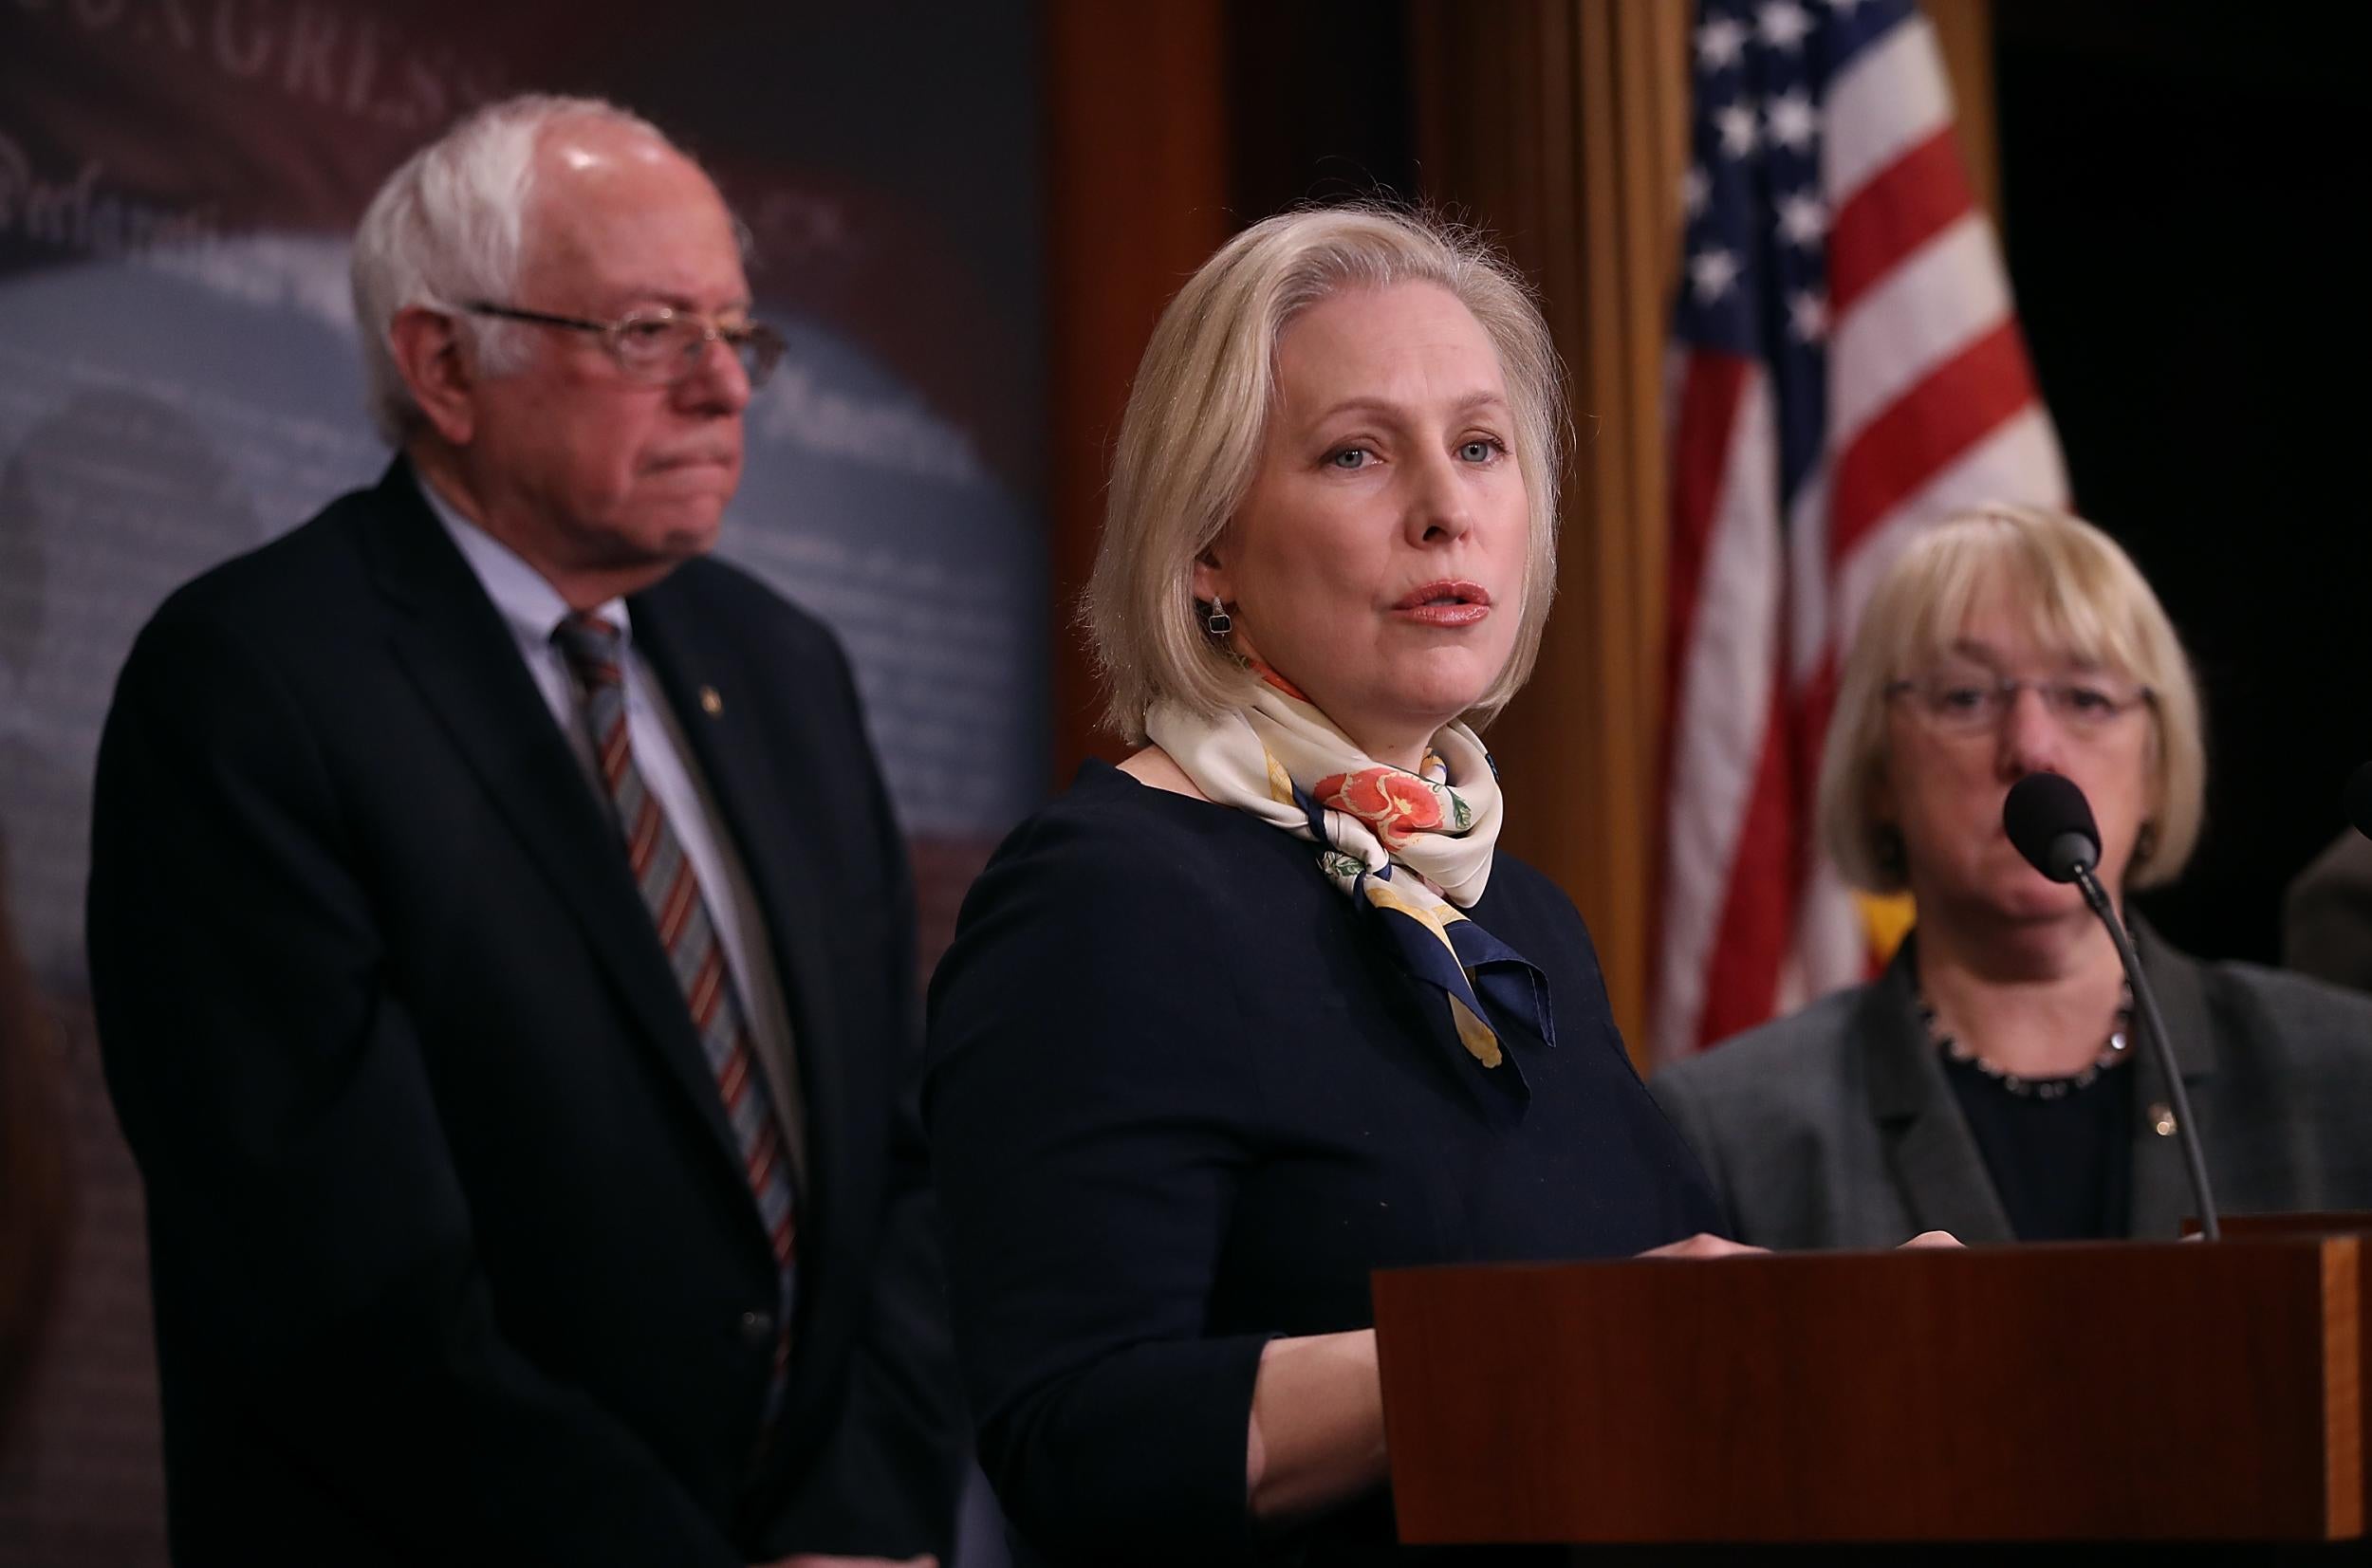 Gillibrand dropped the f-bomb during a speech in New York City